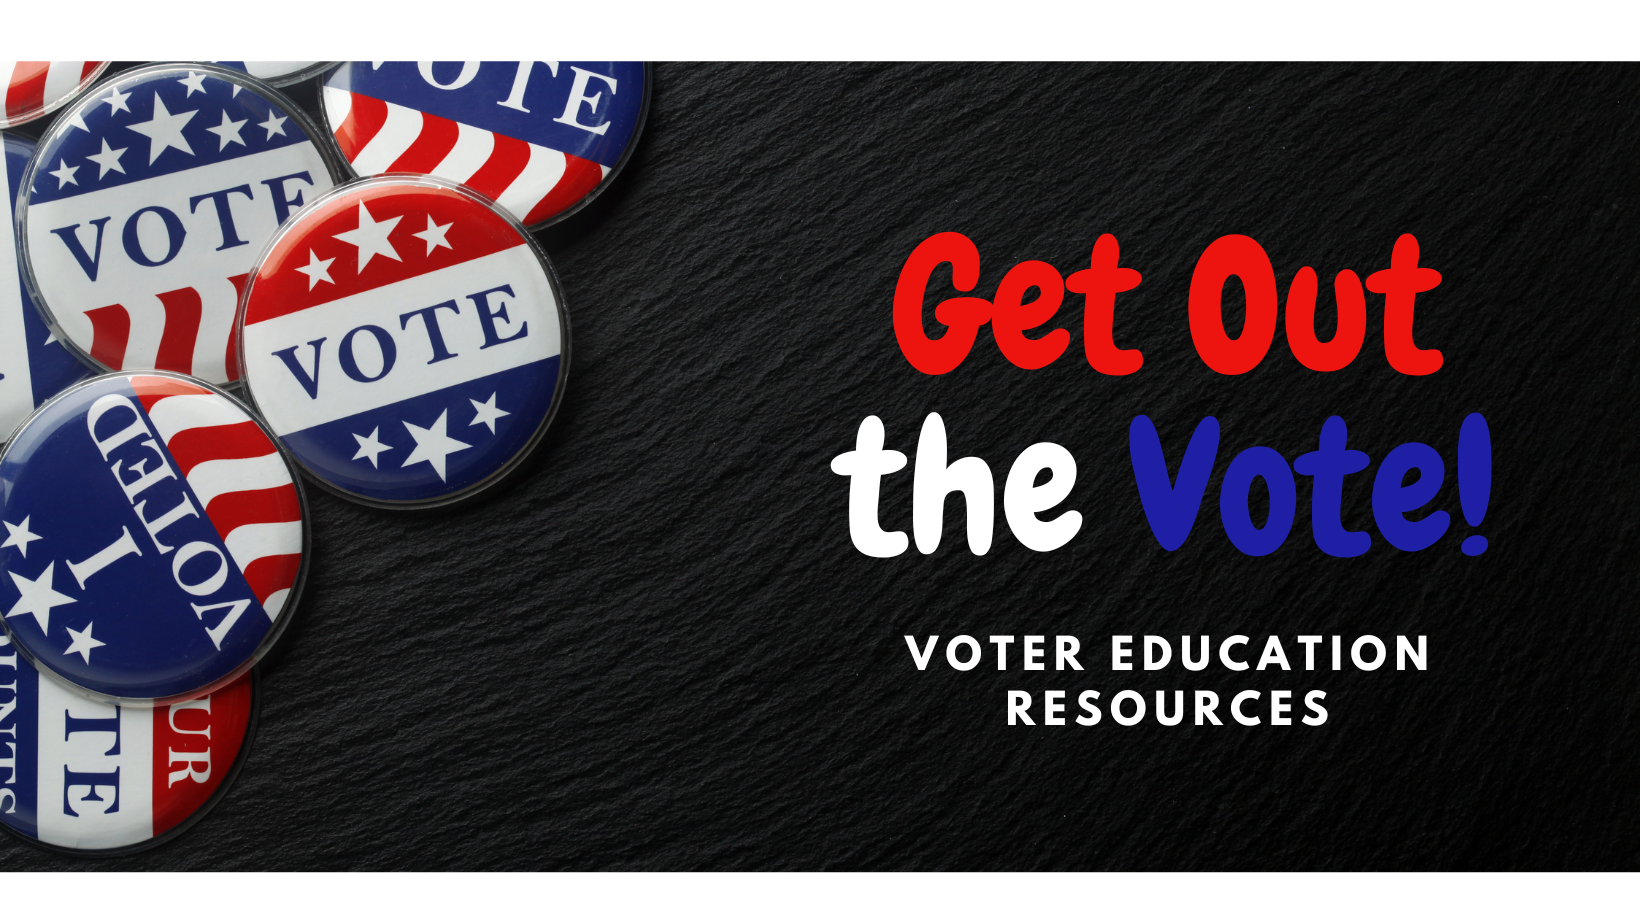 Get Out the Vote Banner with Voter Education Resources 